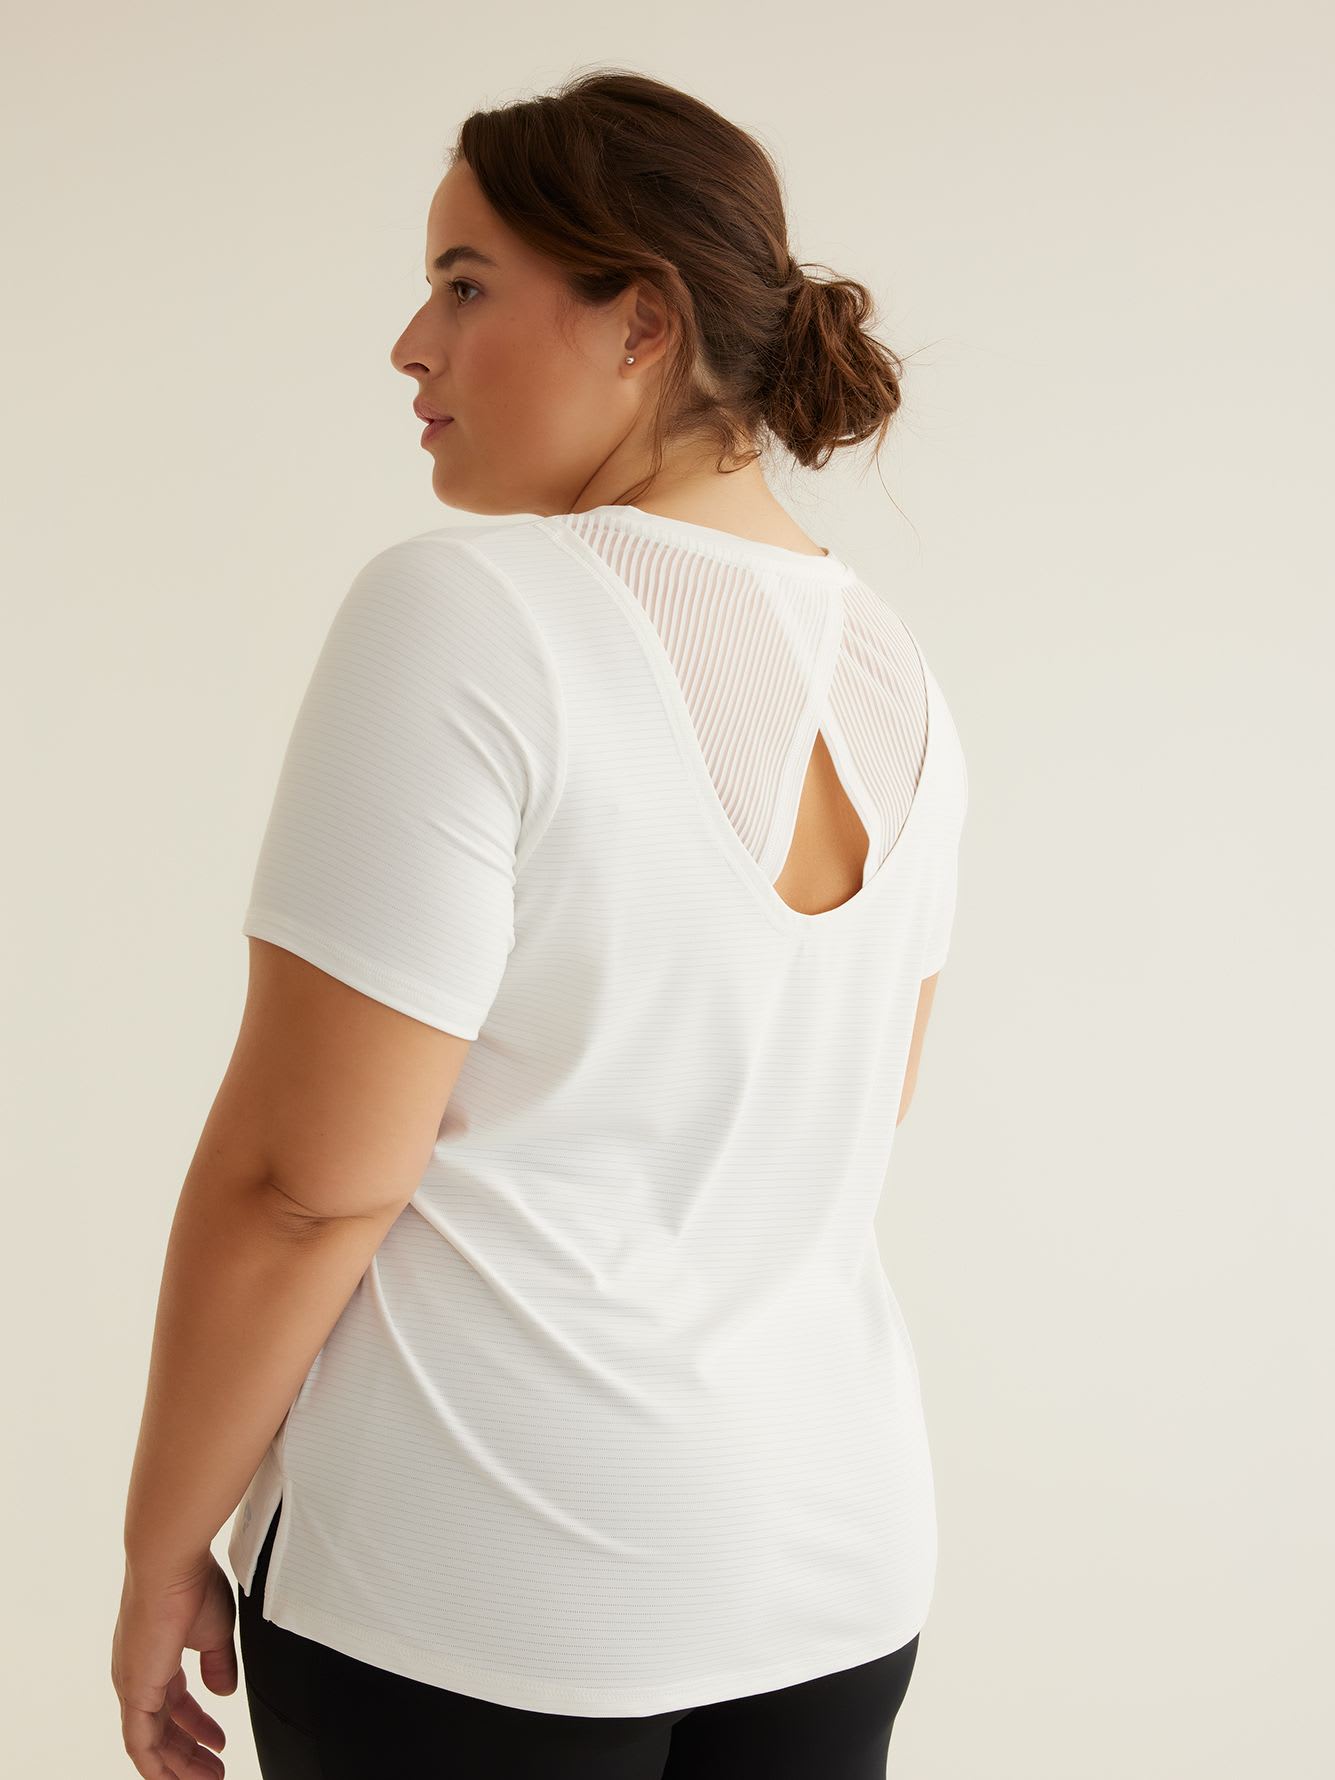 Short-Sleeve Tee with Crisscross Mesh Back - Active Zone